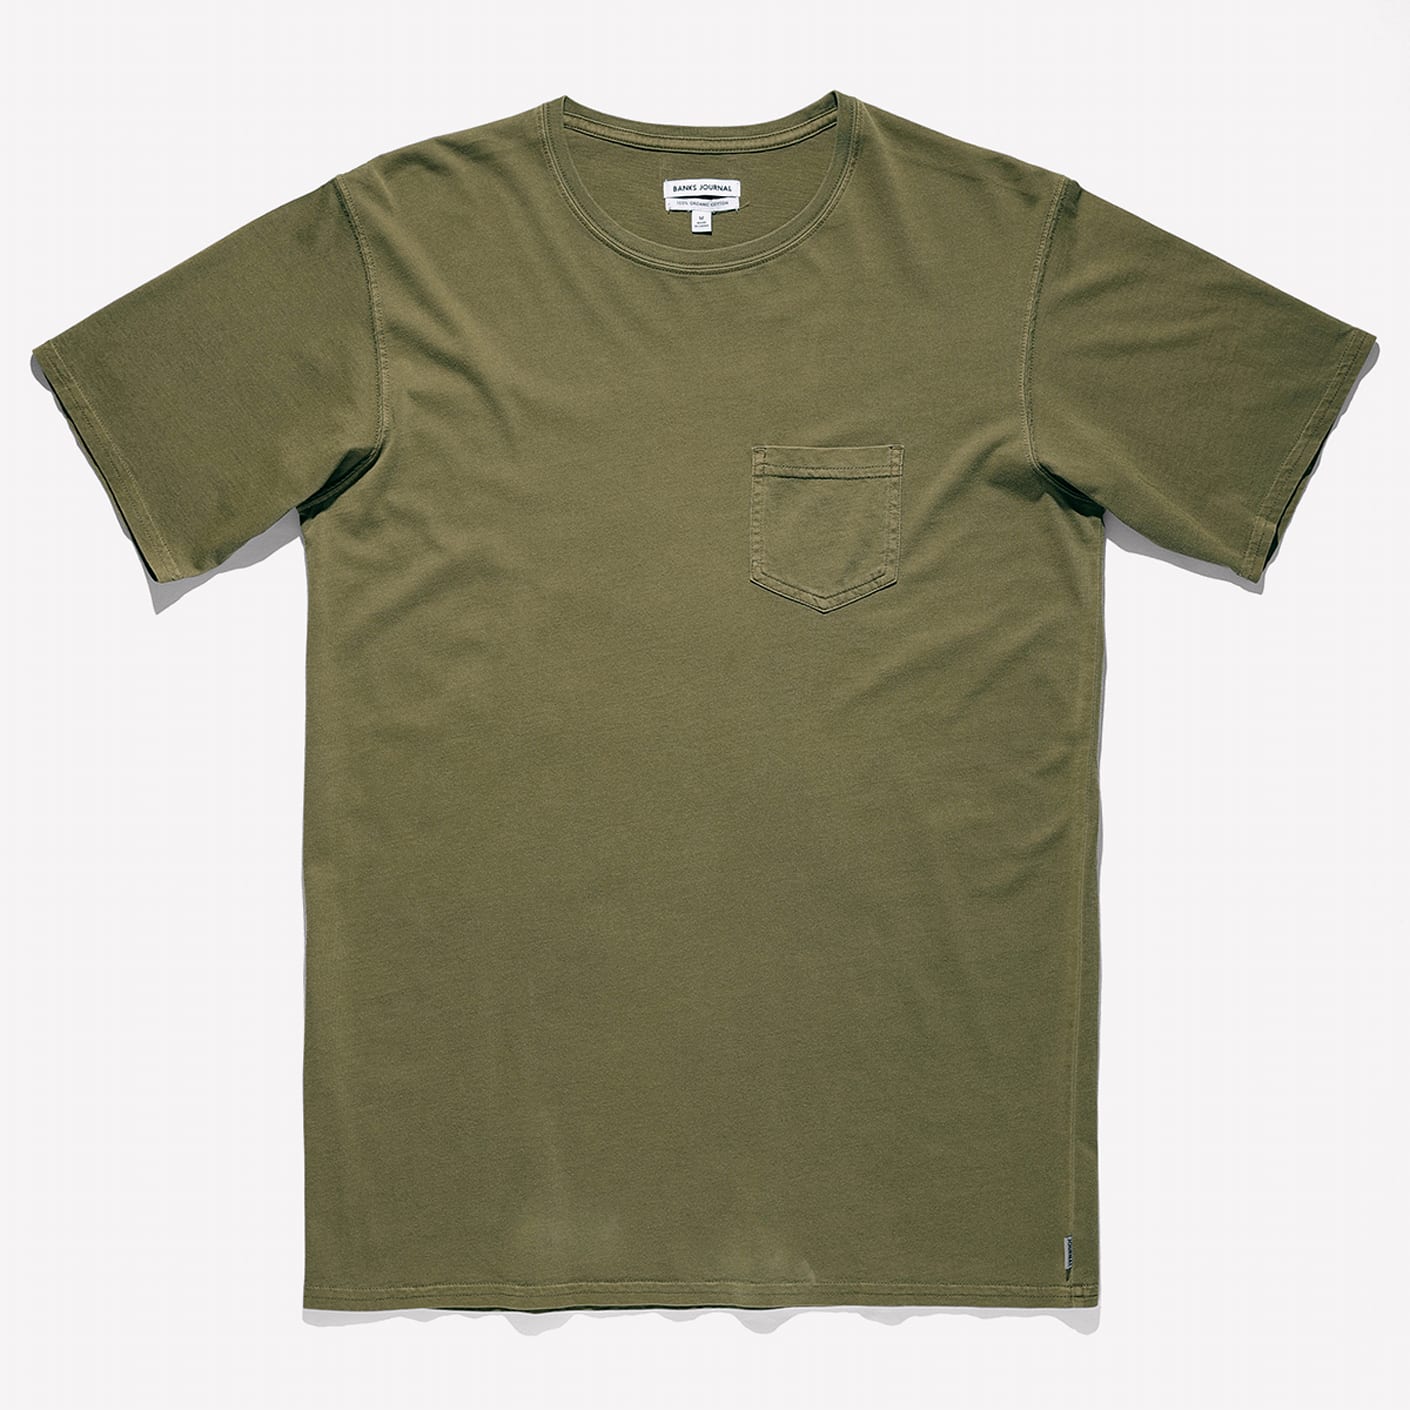 Banks Journal, Primary Faded Tee, Olive